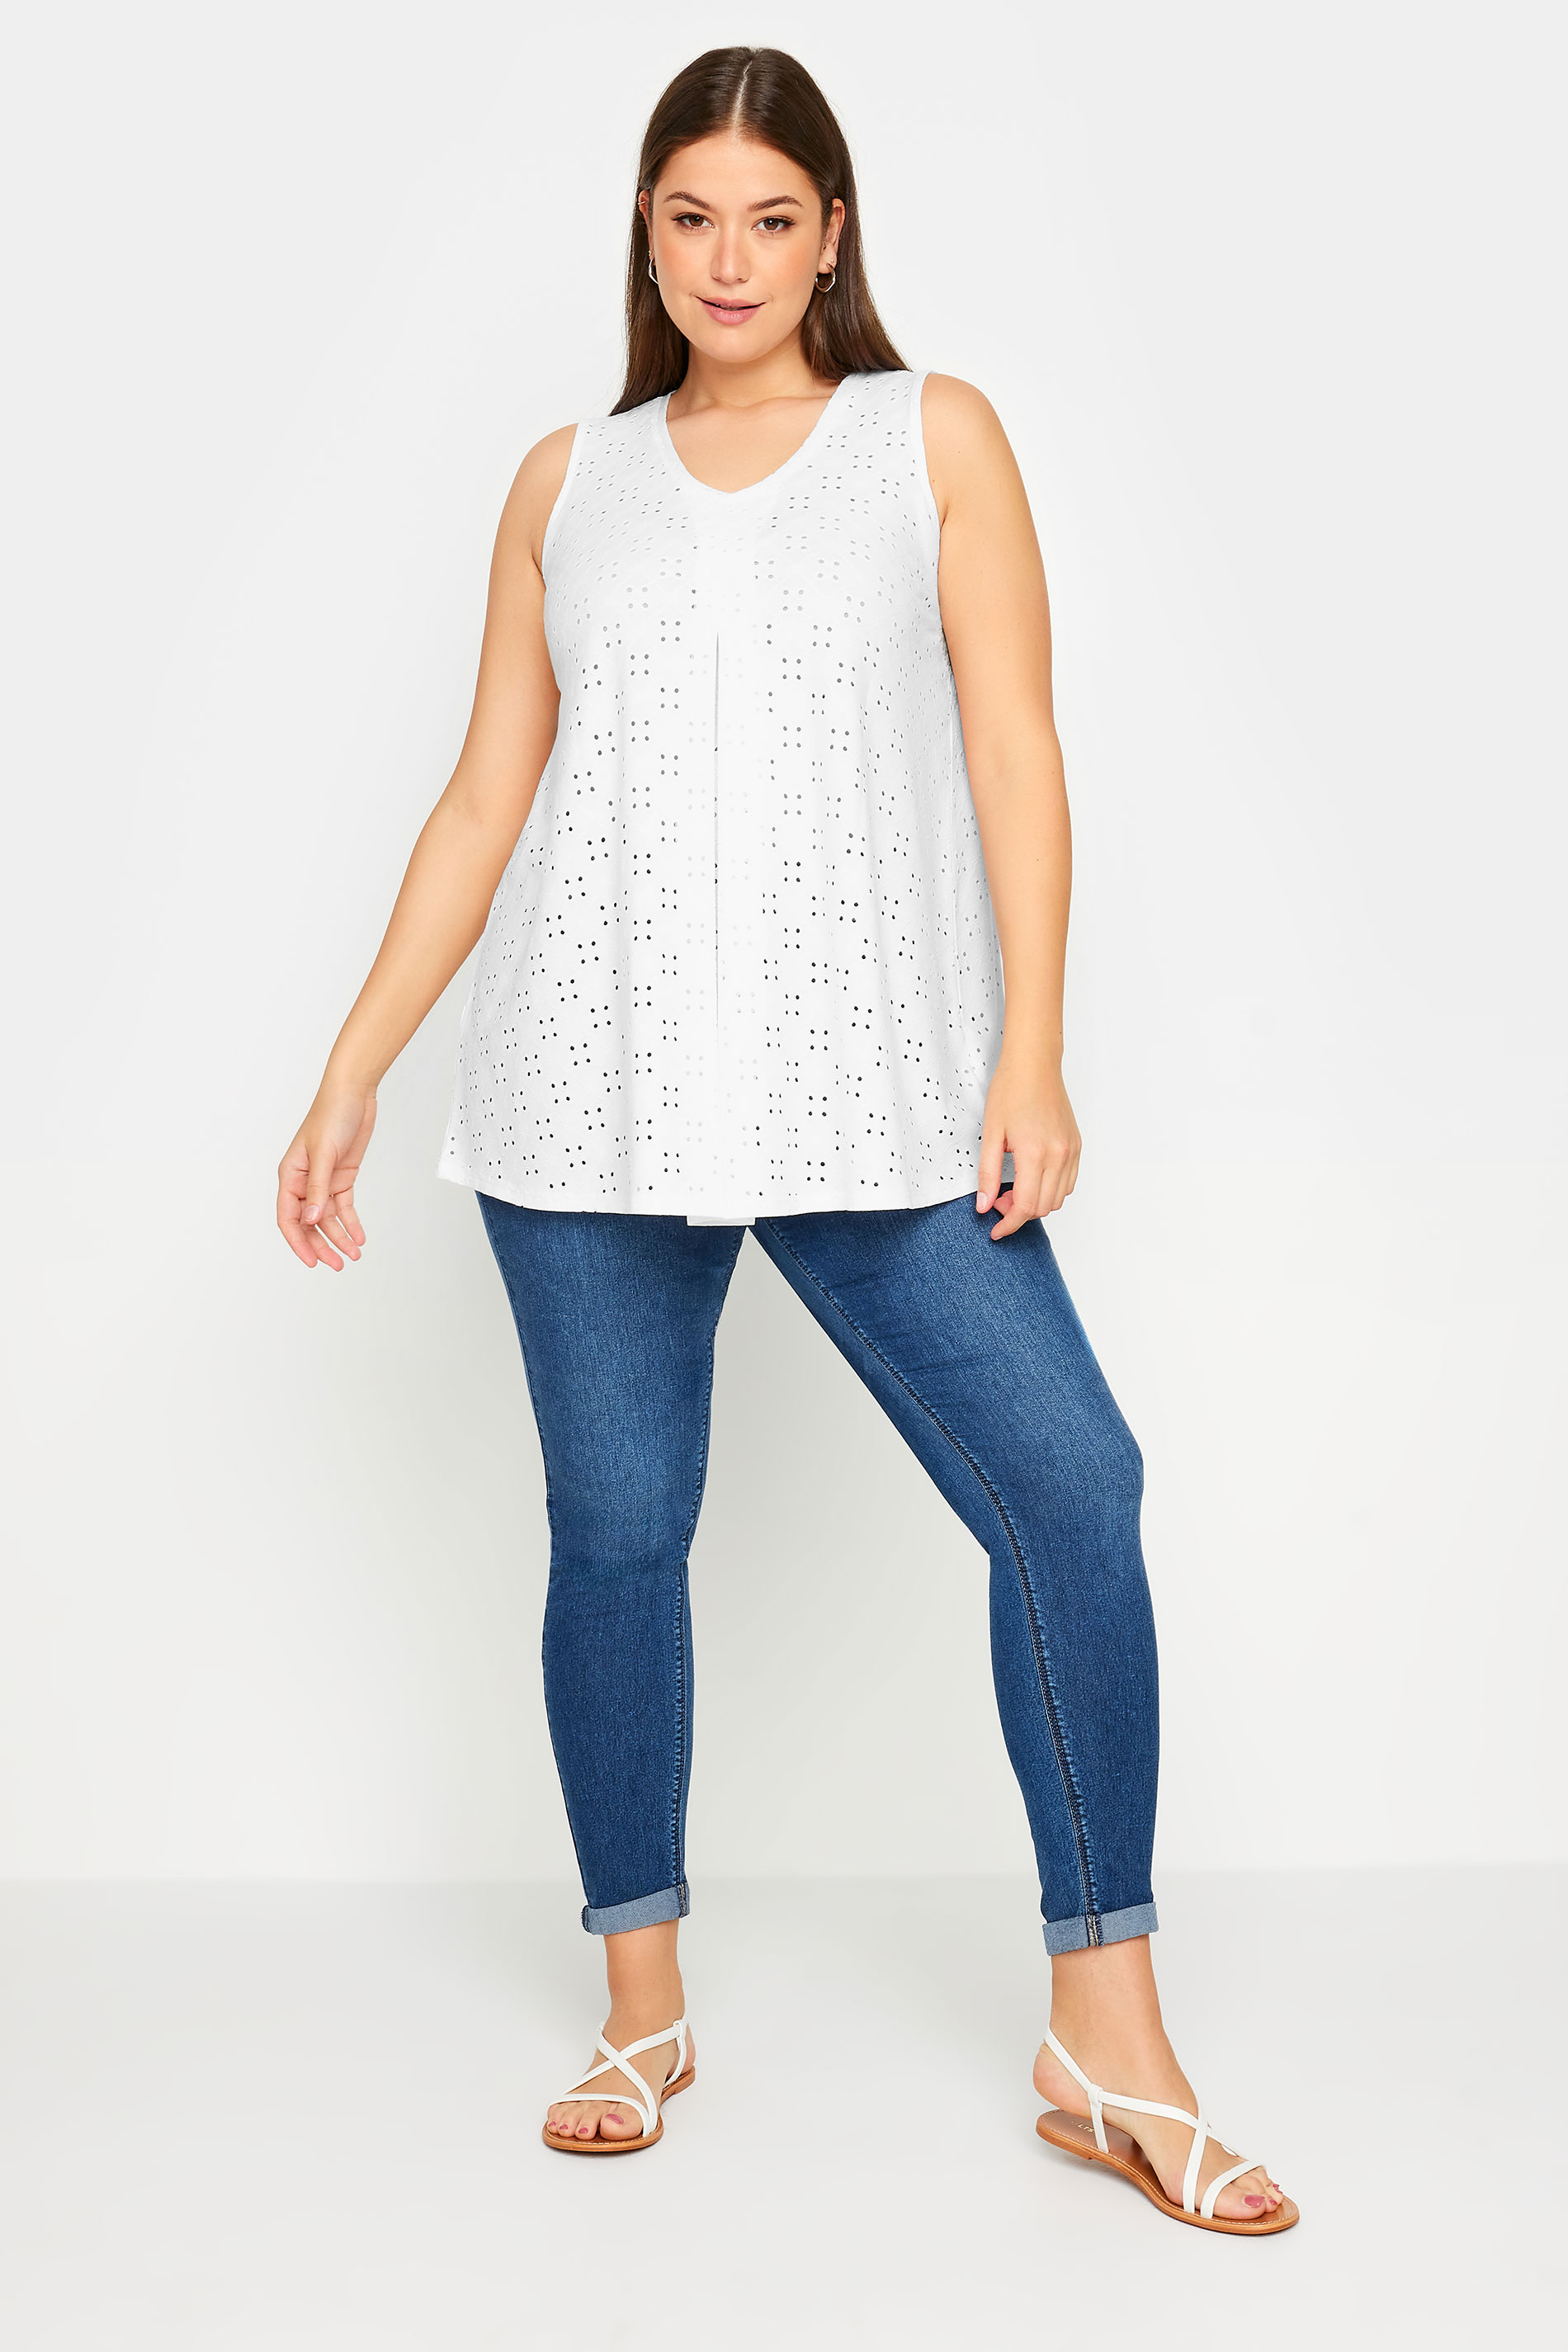 YOURS Plus Size White Broderie Anglaise Swing Vest Top | Yours Clothing 2